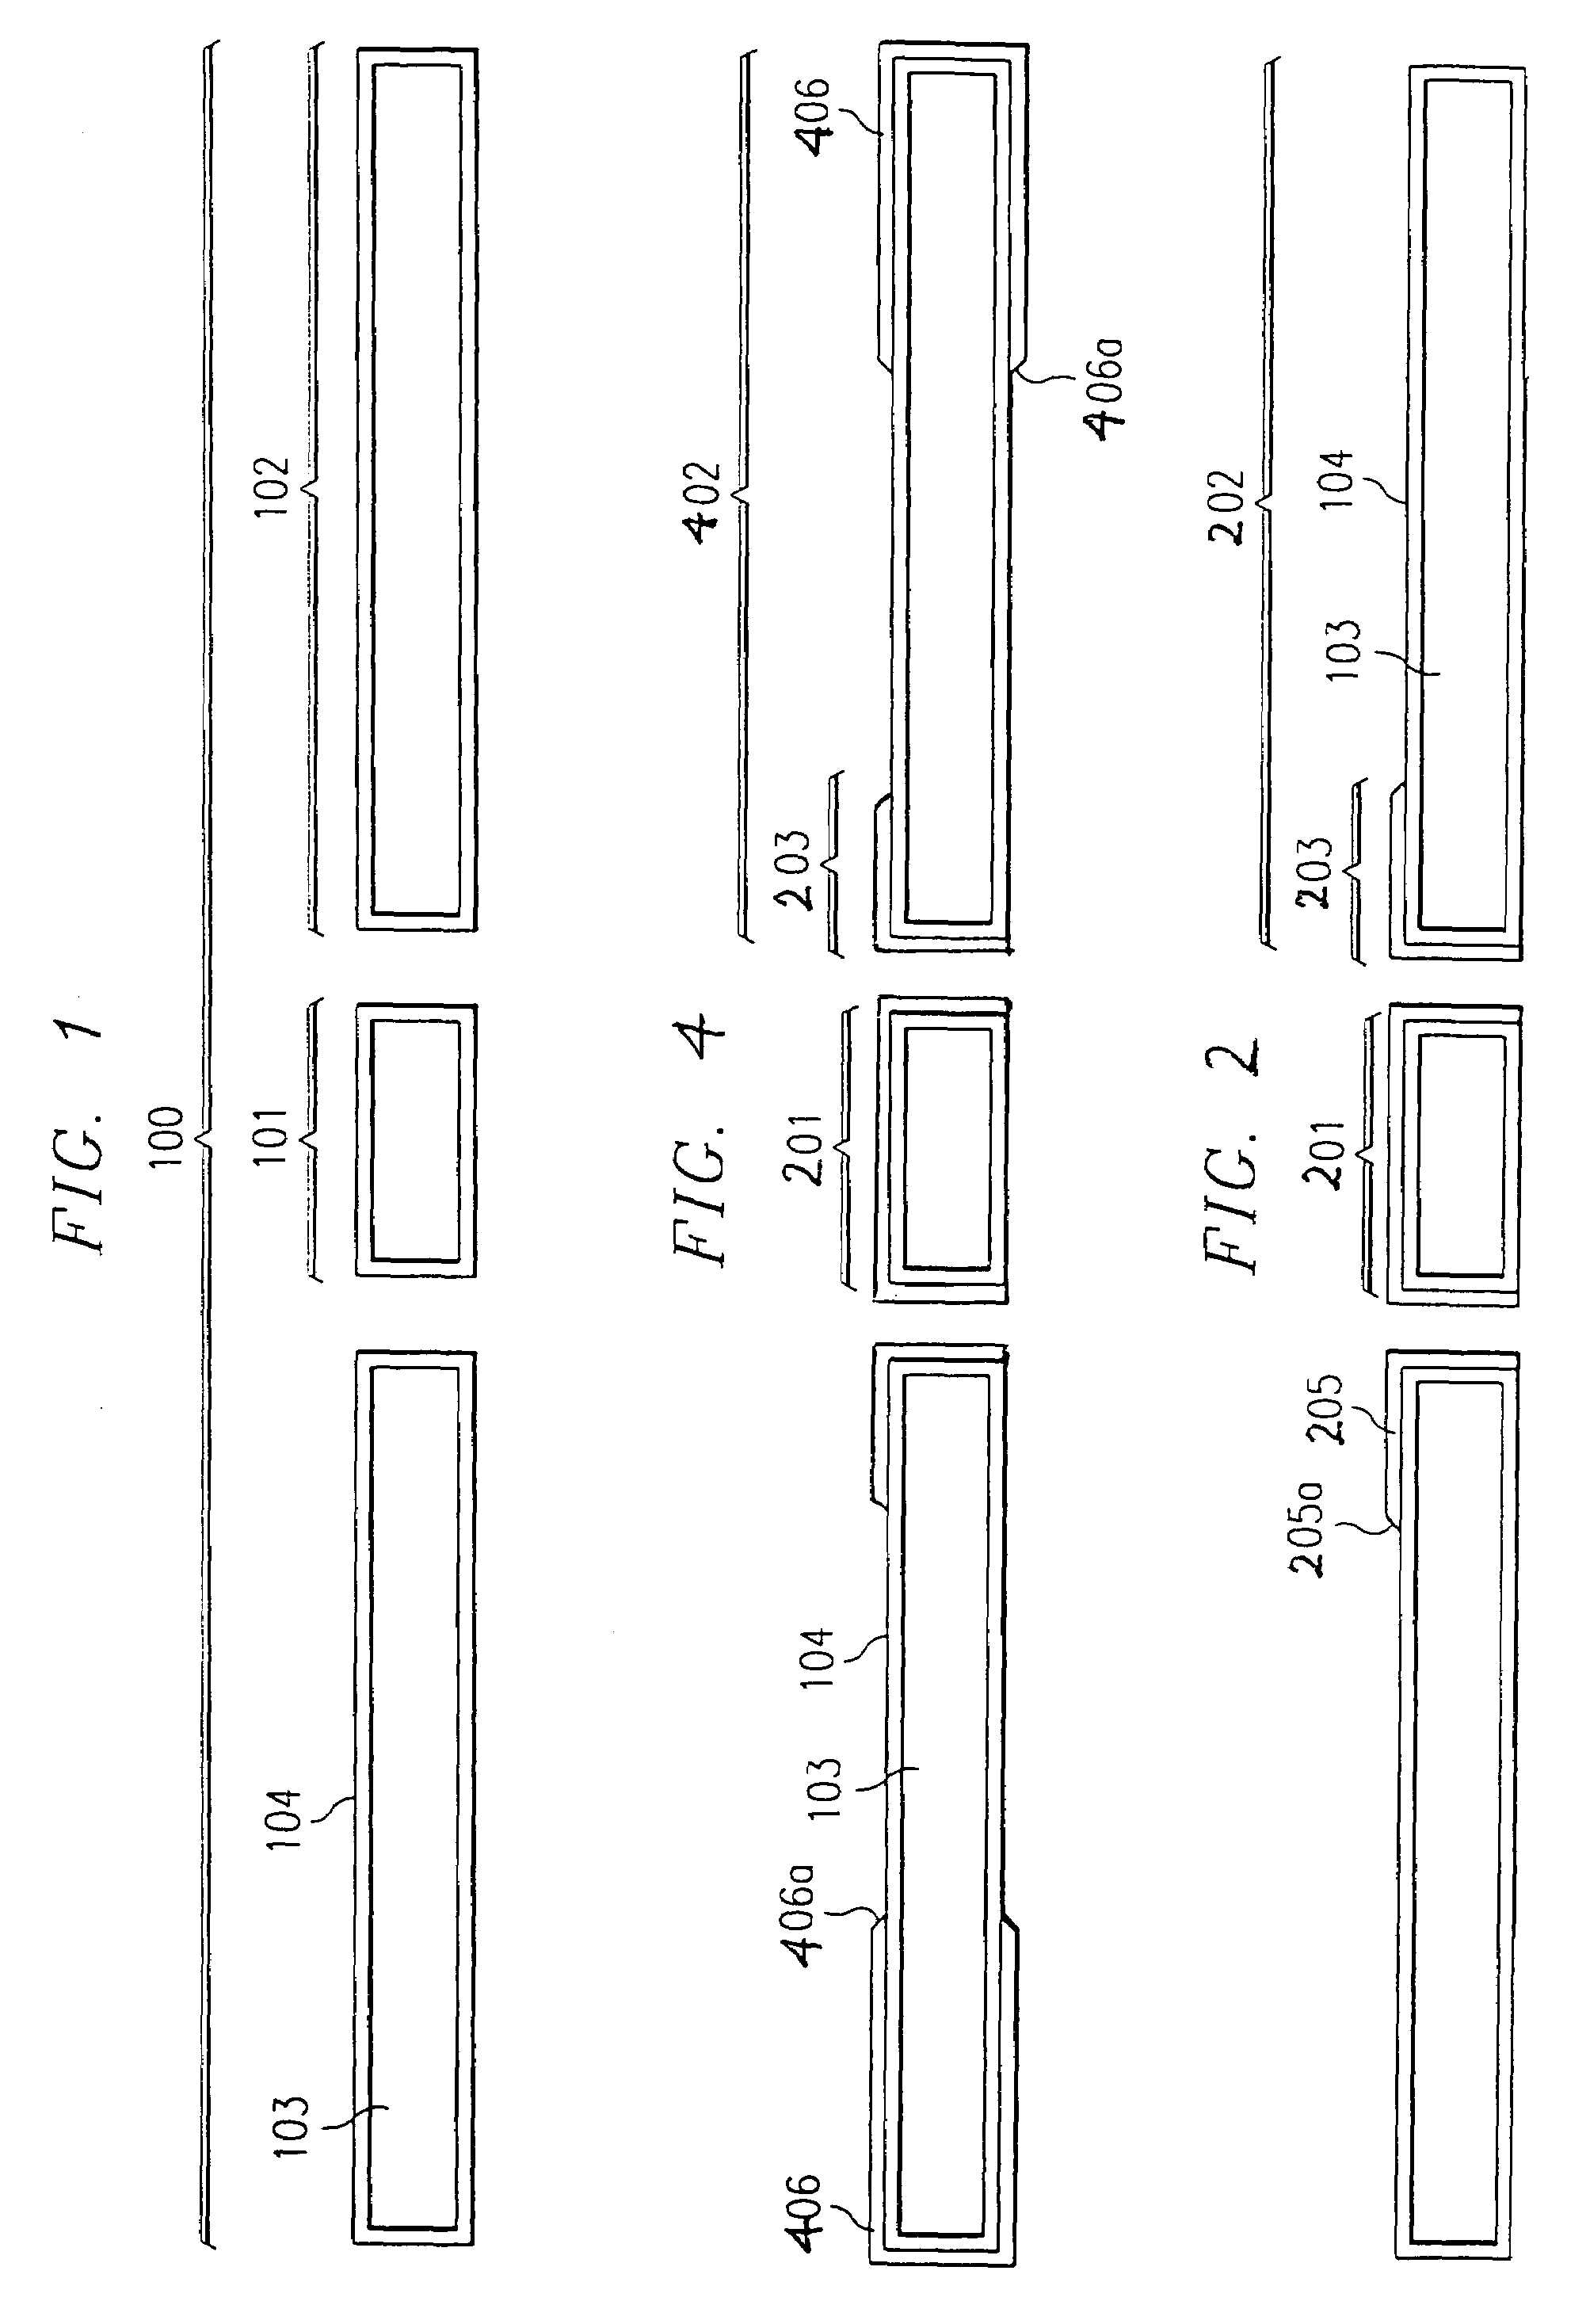 Semiconductor leadframes plated with thick nickel, minimum palladium, and pure tin